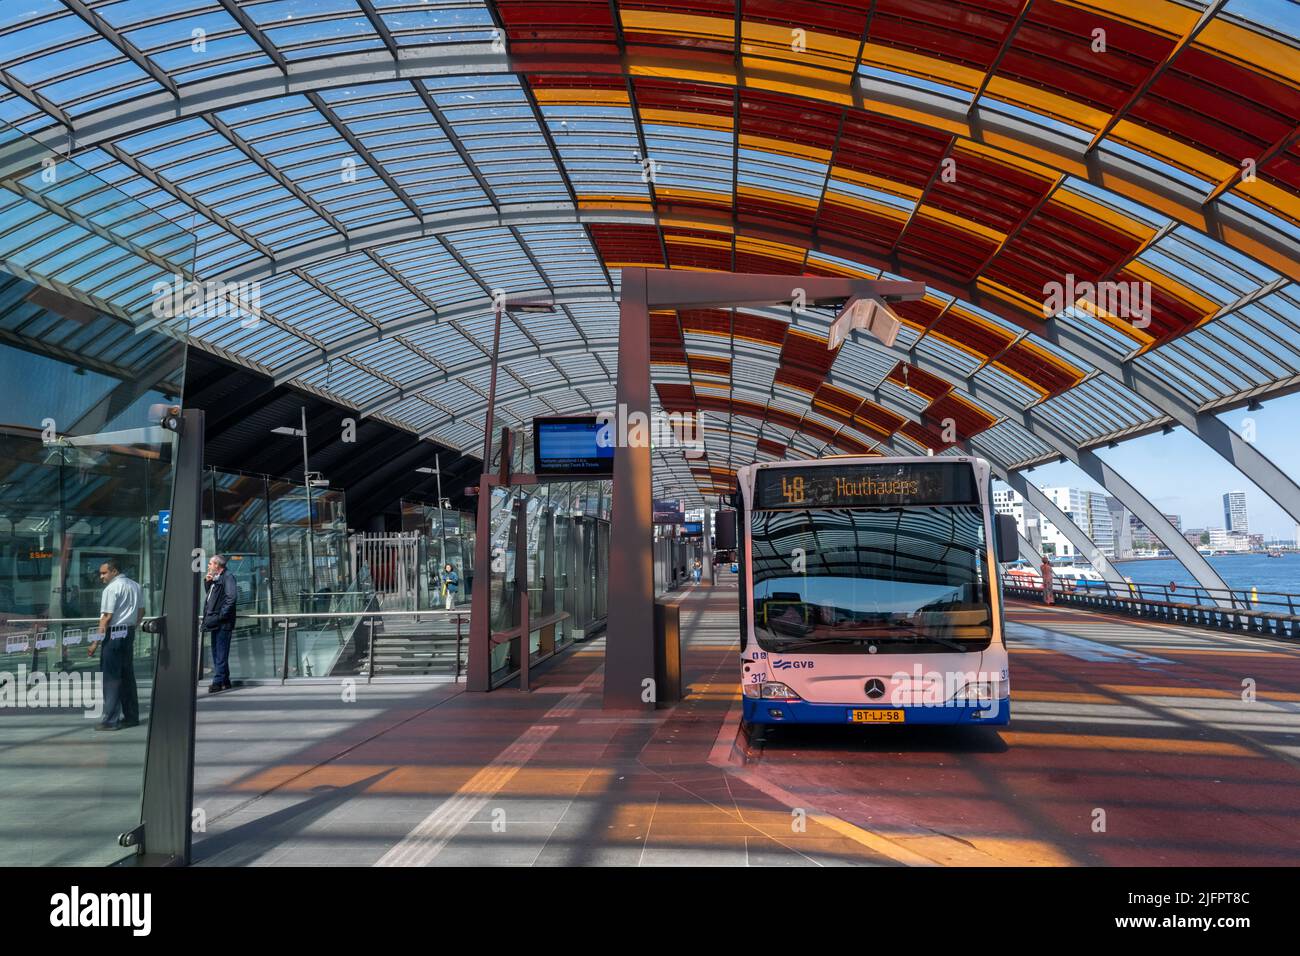 Amsterdam, The Netherlands - 21 June 2022: GVB Bus at Amsterdam Central Station Bus Station Stock Photo